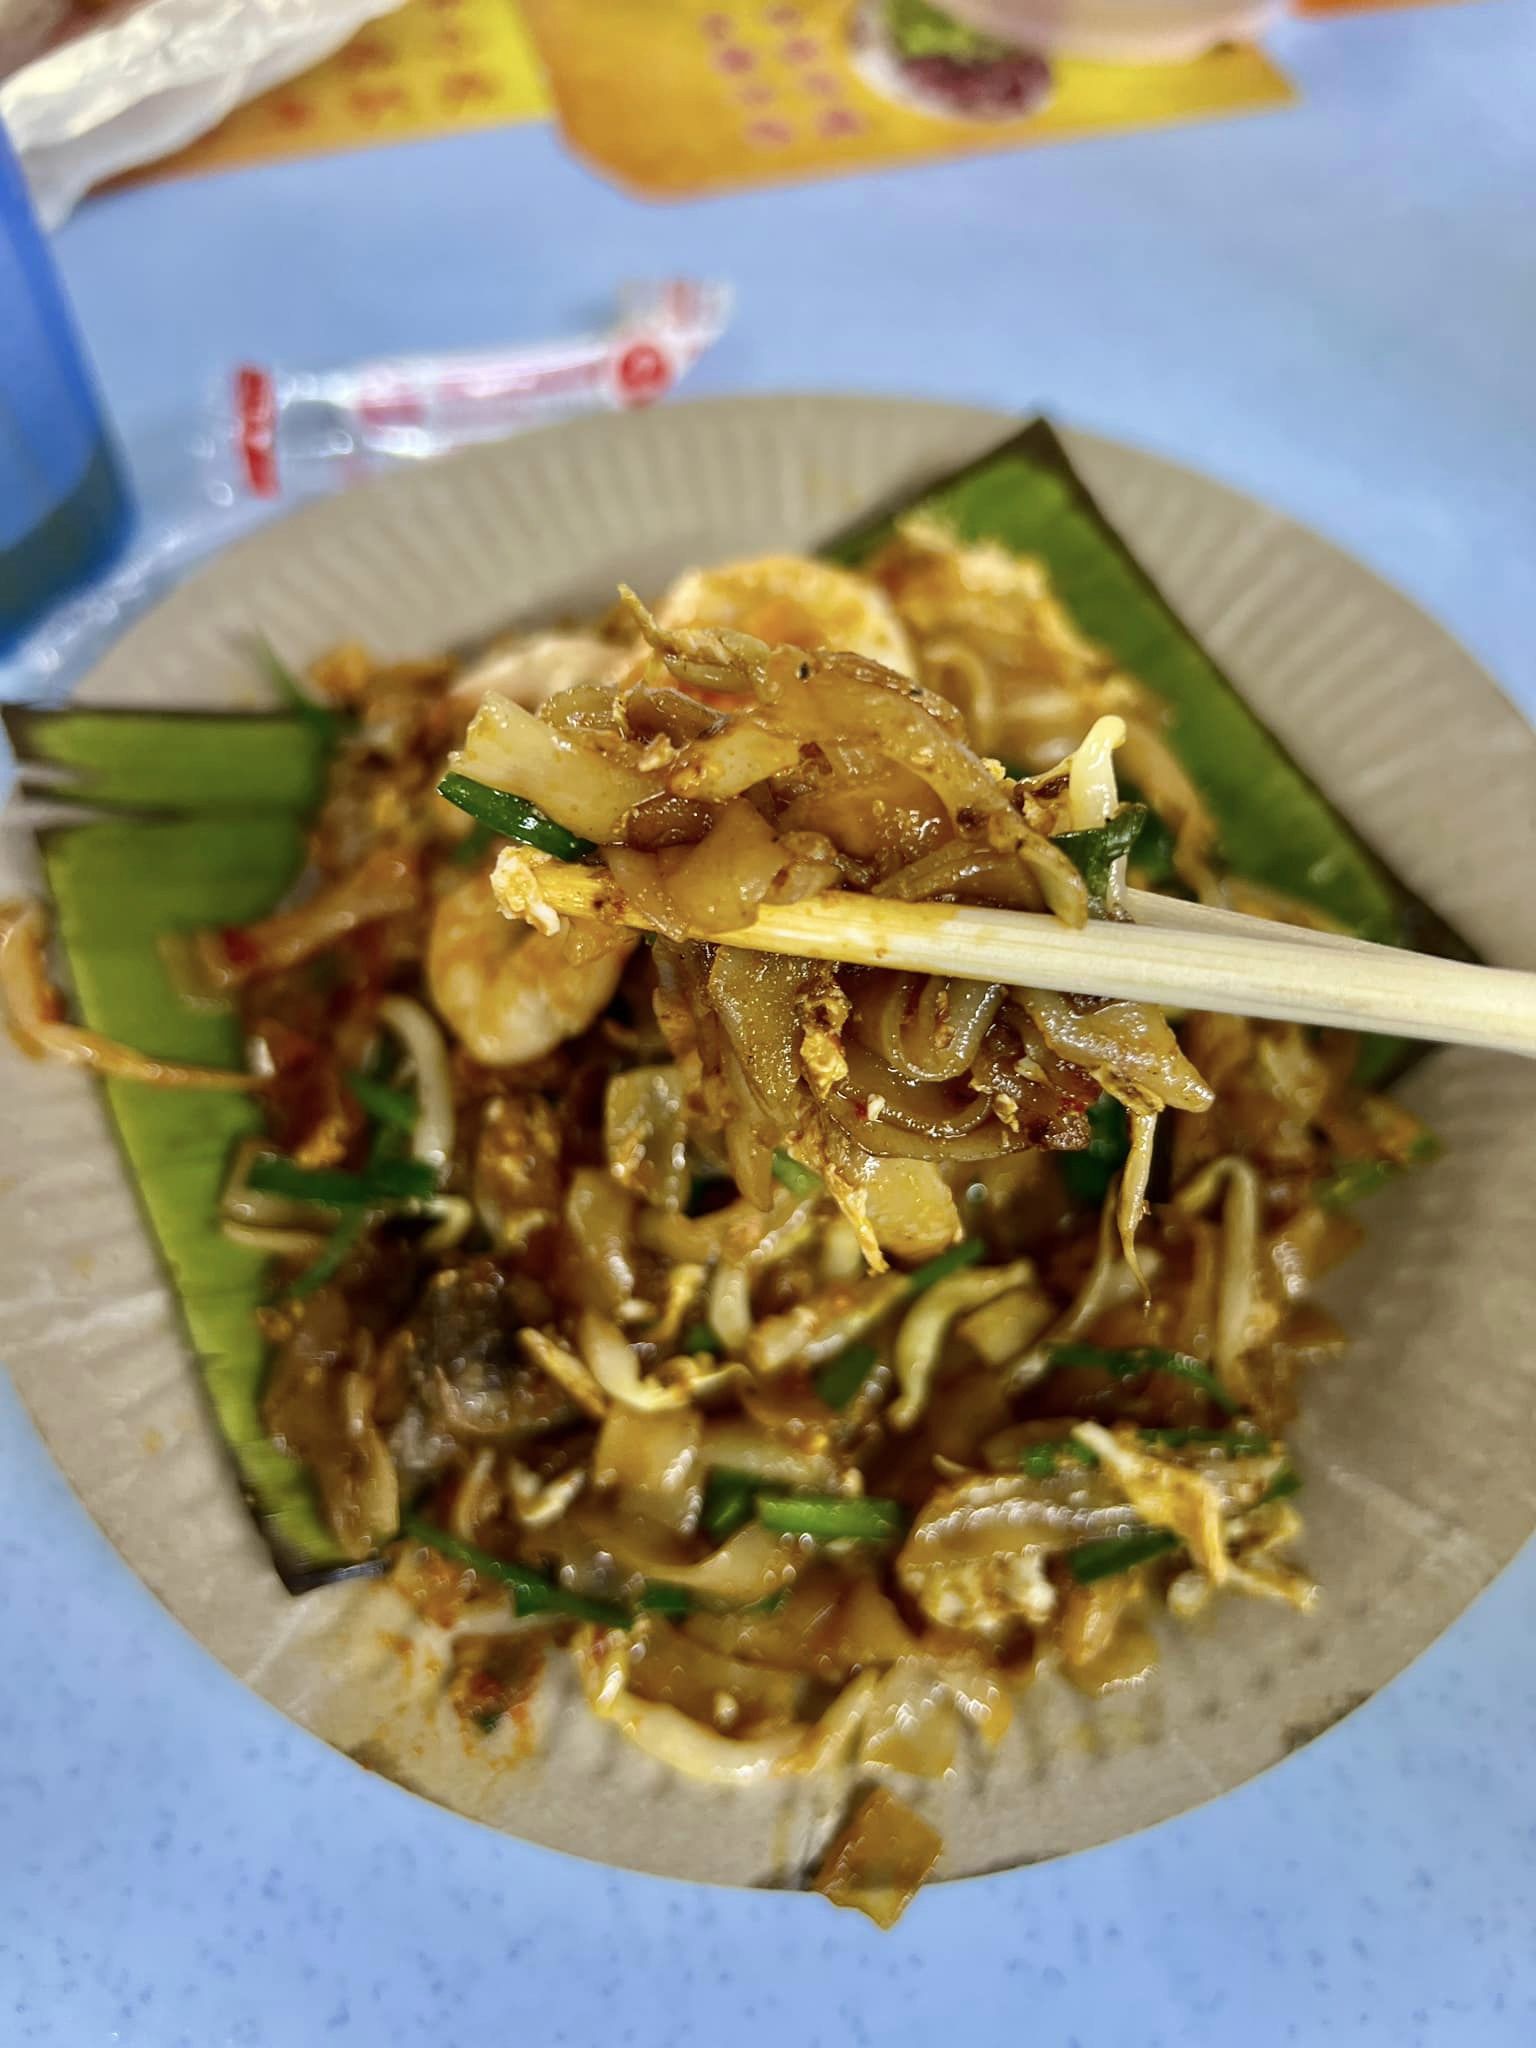 Barefoot Char Koay Teow is a Must Have